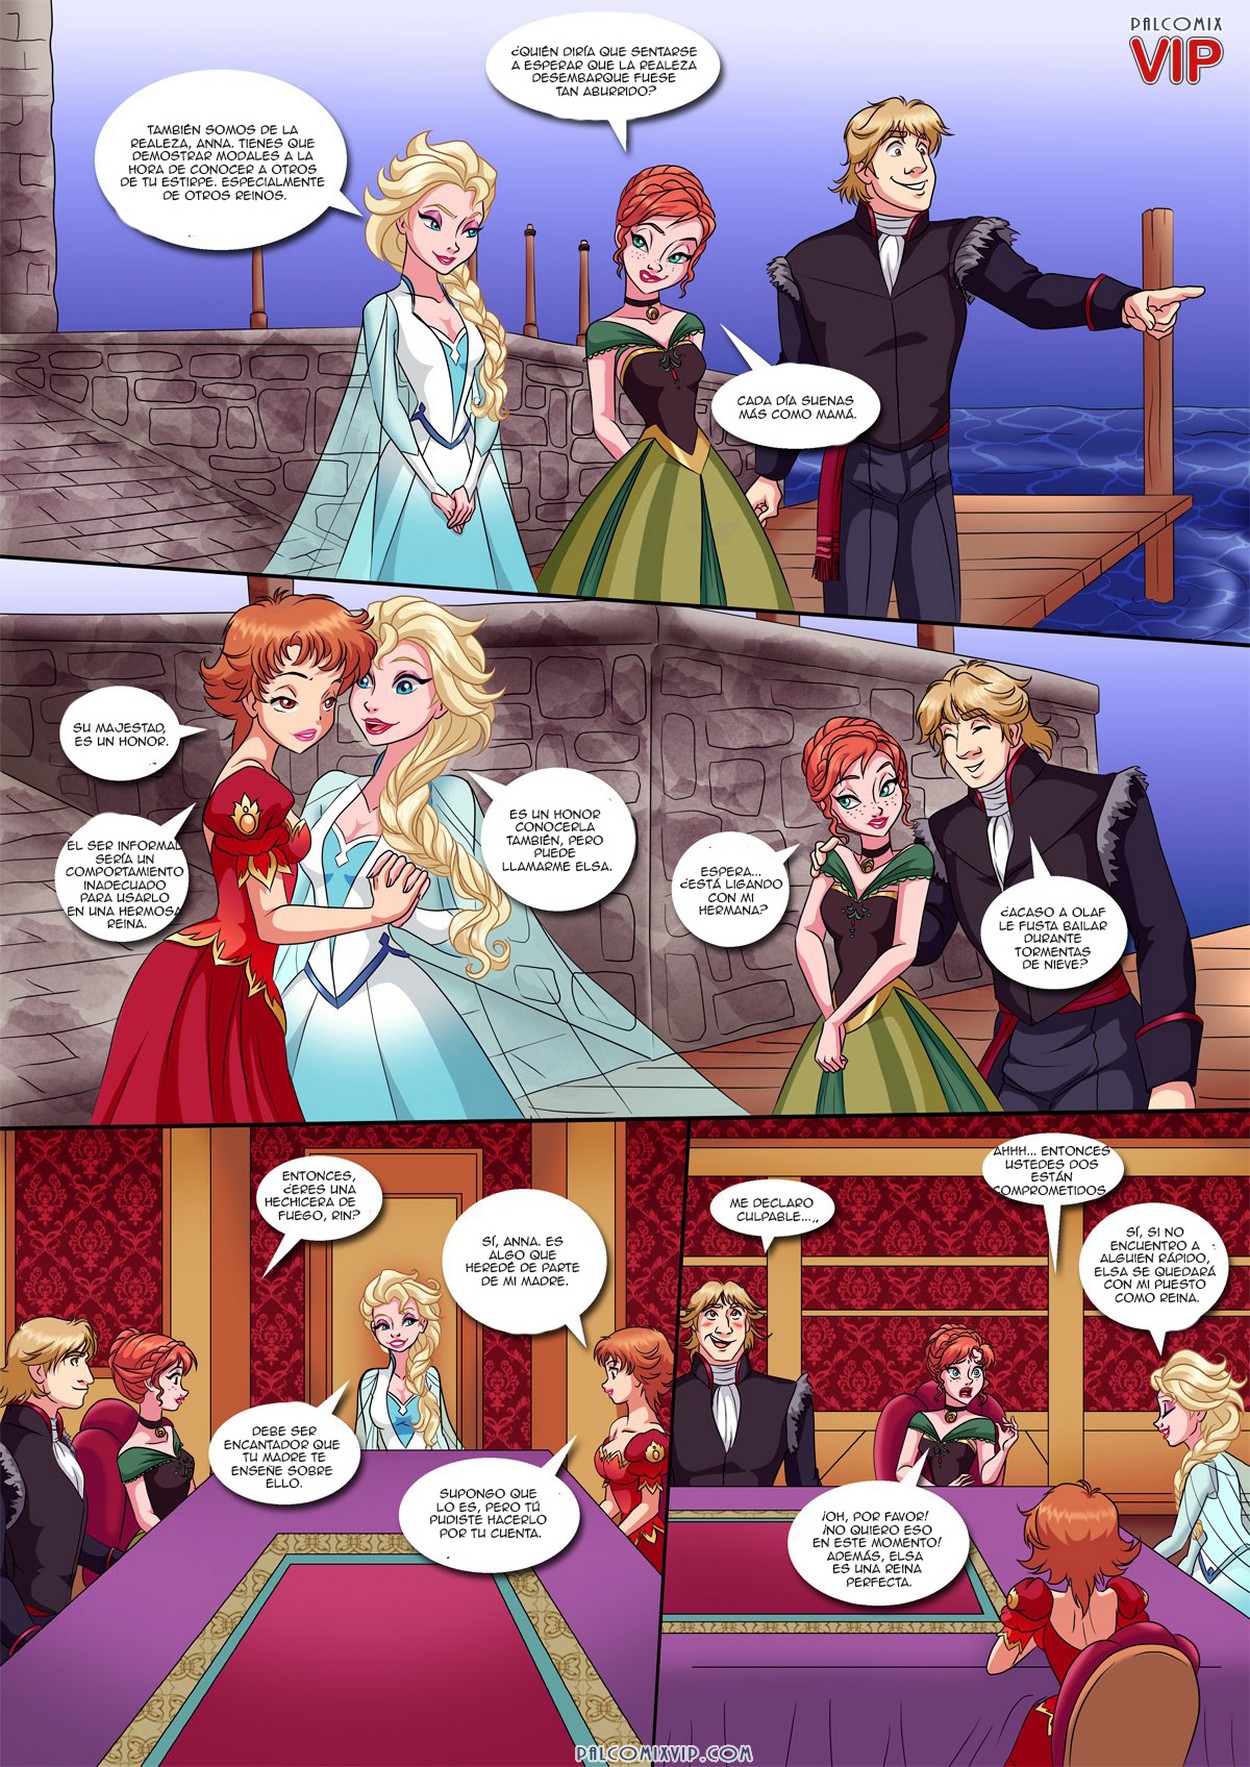 50 Shades of Frozen – Palcomix - fded7417ae7ce730214c449d103513a1